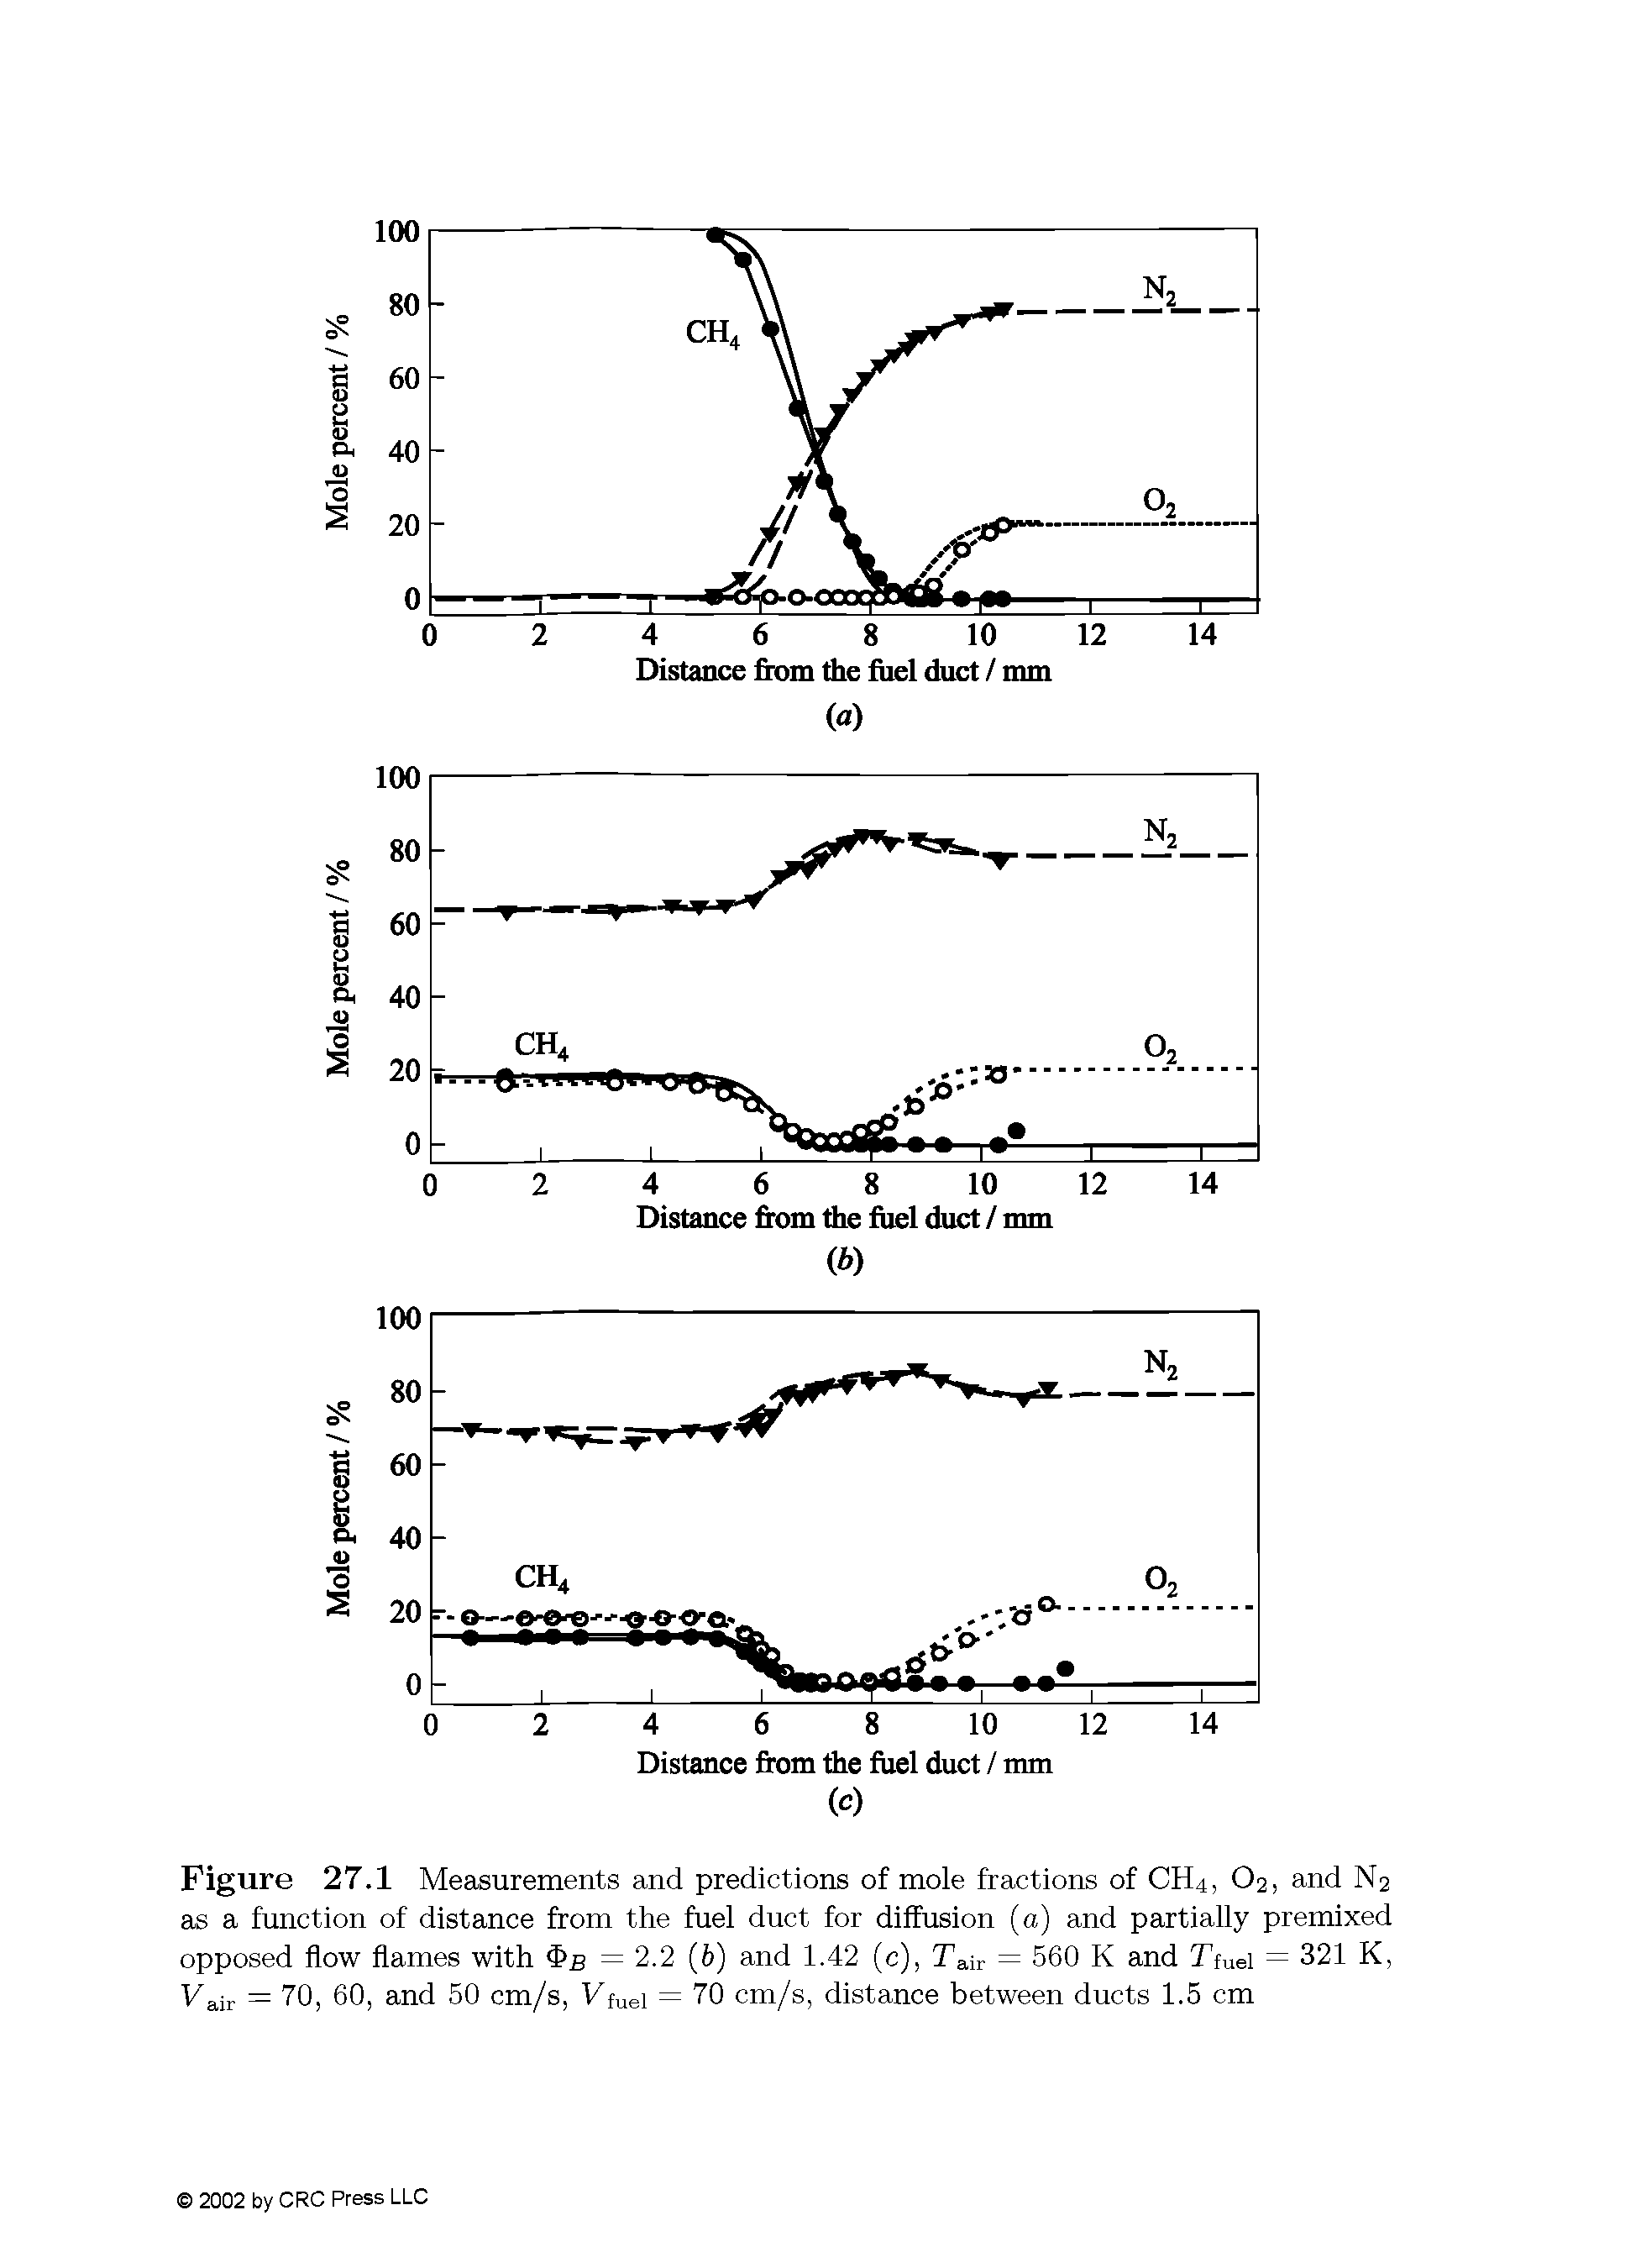 Figure 27.1 Measurements and predictions of mole fractions of CH4, O2, and N2 as a function of distance from the fuel duct for diffusion (a) and partially premixed opposed flow flames with b = 2.2 (6) and 1.42 (c), Tair = 560 K and Ttuei = 321 K, Fair = 70, 60, and 50 cm/s, Ffuei = 70 cm/s, distance between ducts 1.5 cm...